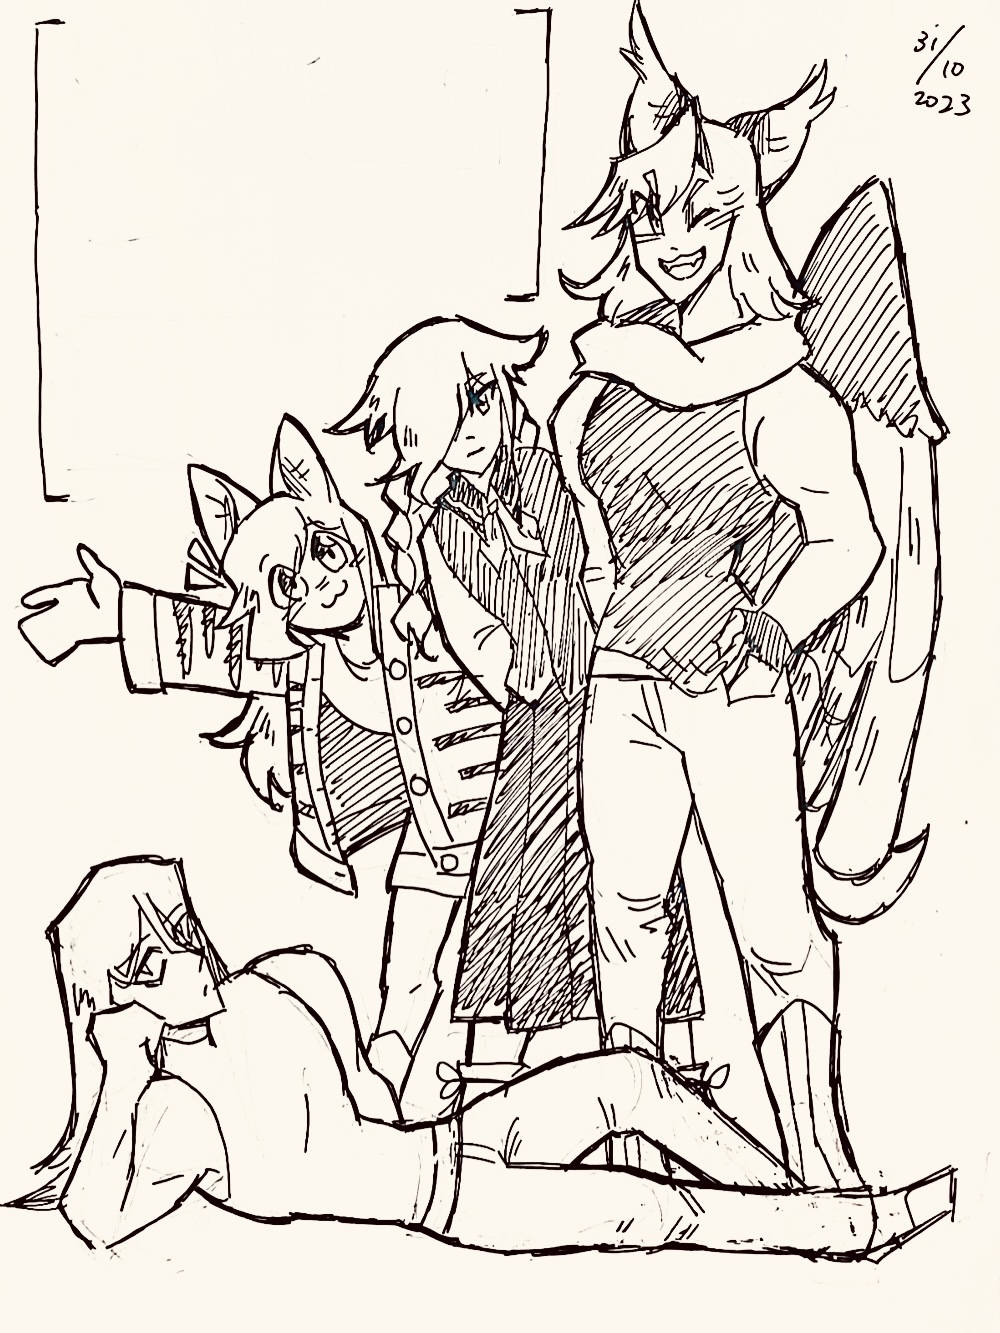 Drawing of Cosmos, Lavender, Kyrea and Jaspers in a group photo